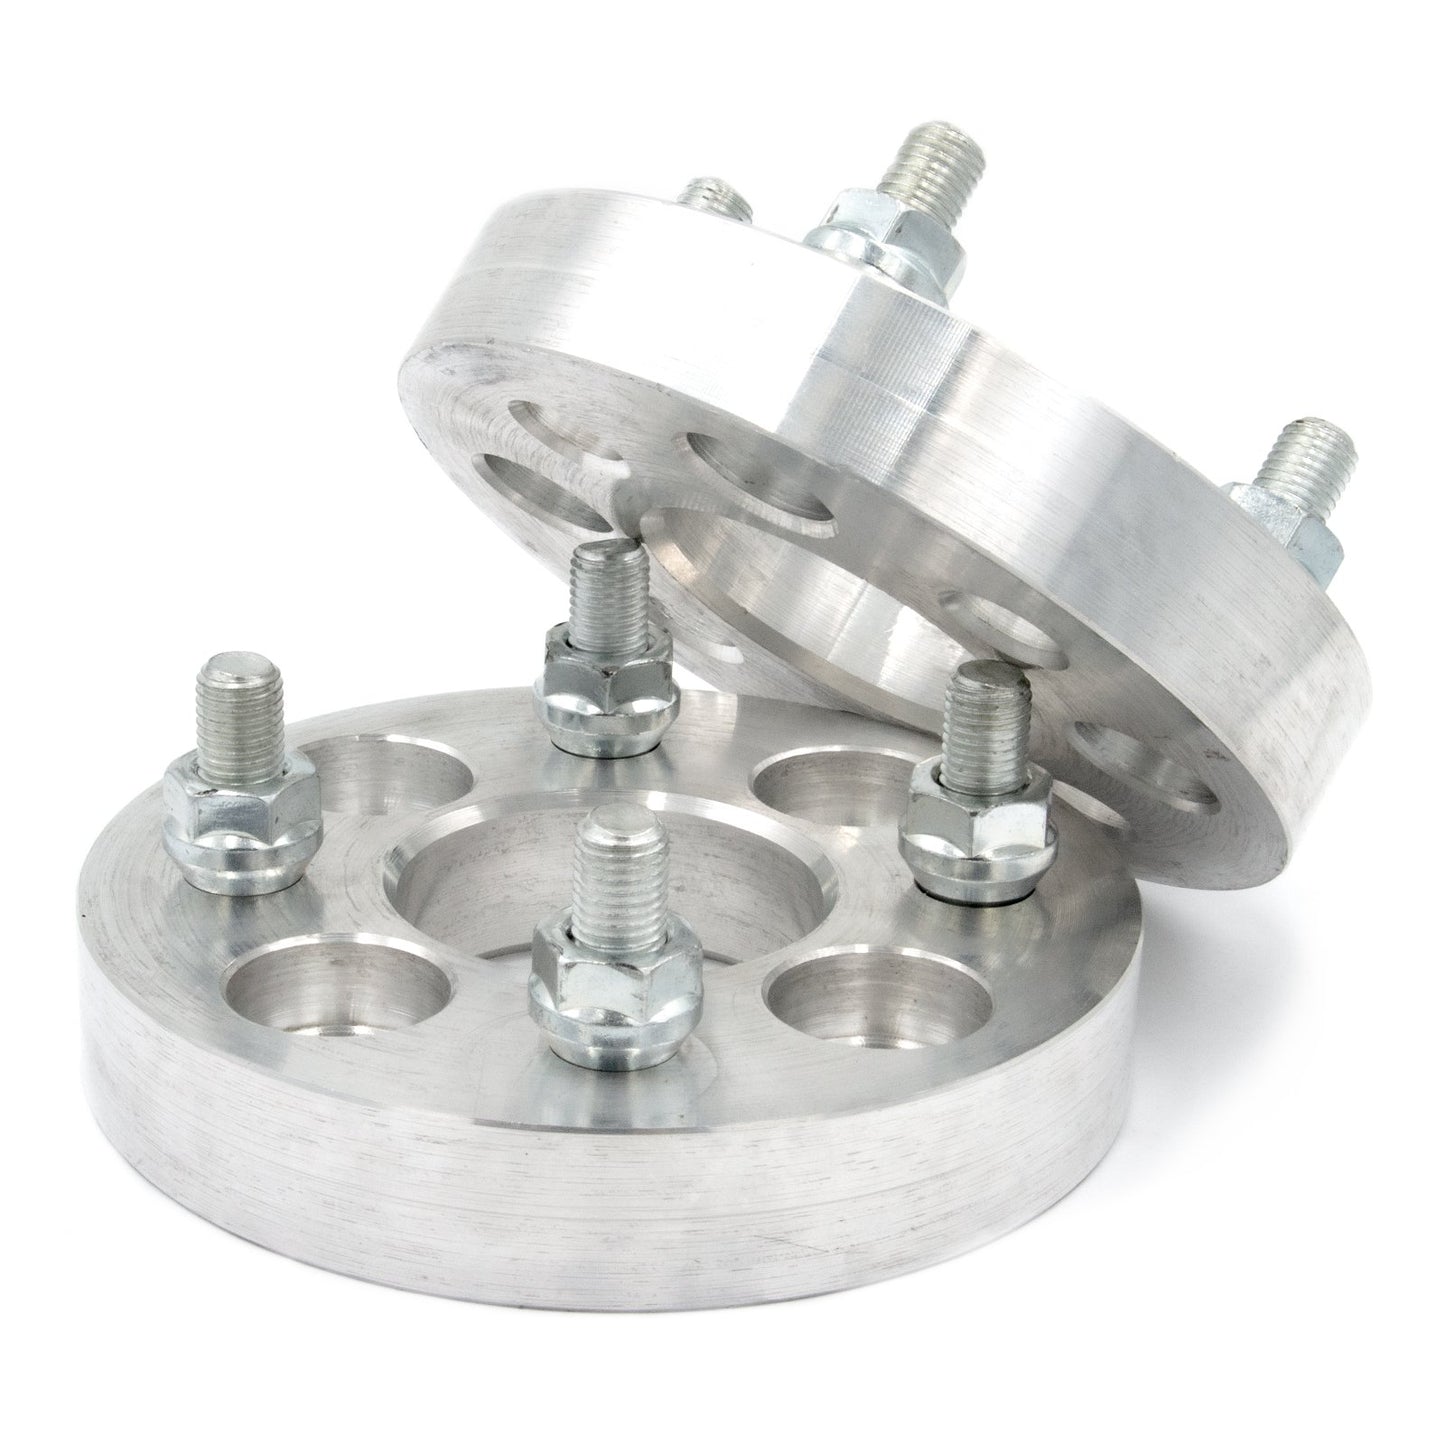 4x4.25" to 4x100 Wheel Spacer/Adapter - Thickness: 3/4"- 4"